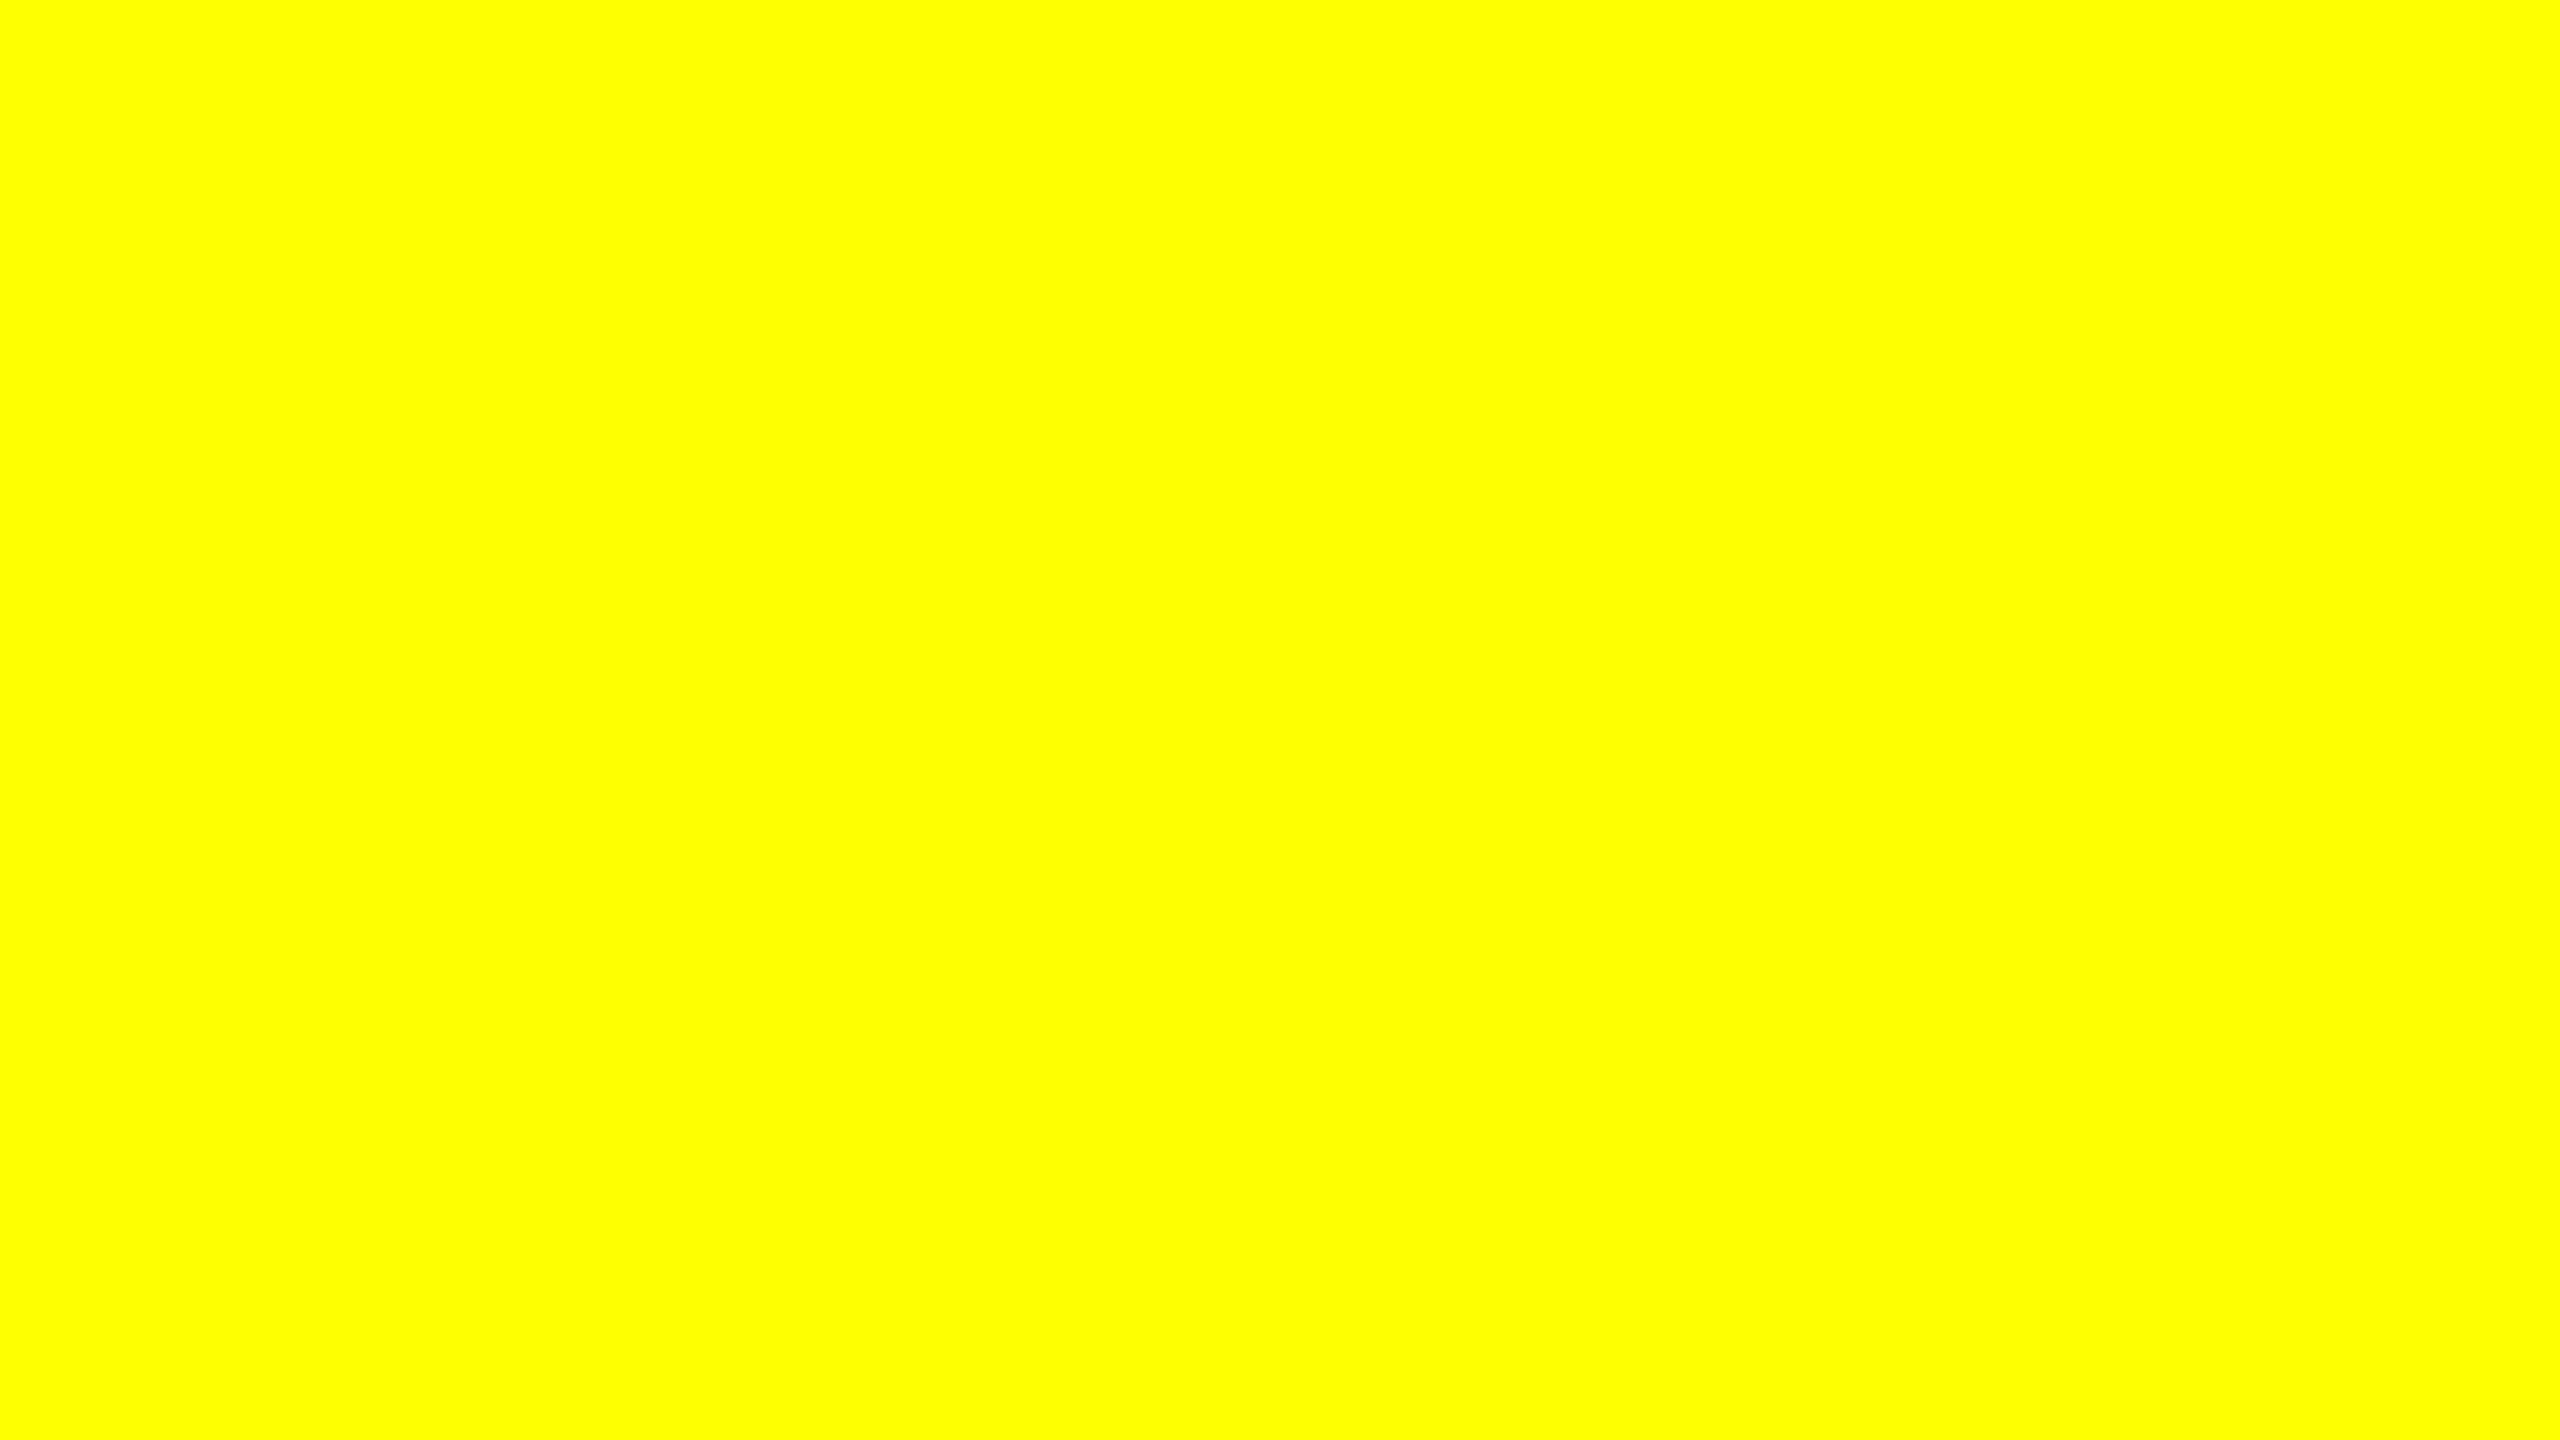 HD black and yellow wallpapers | Peakpx